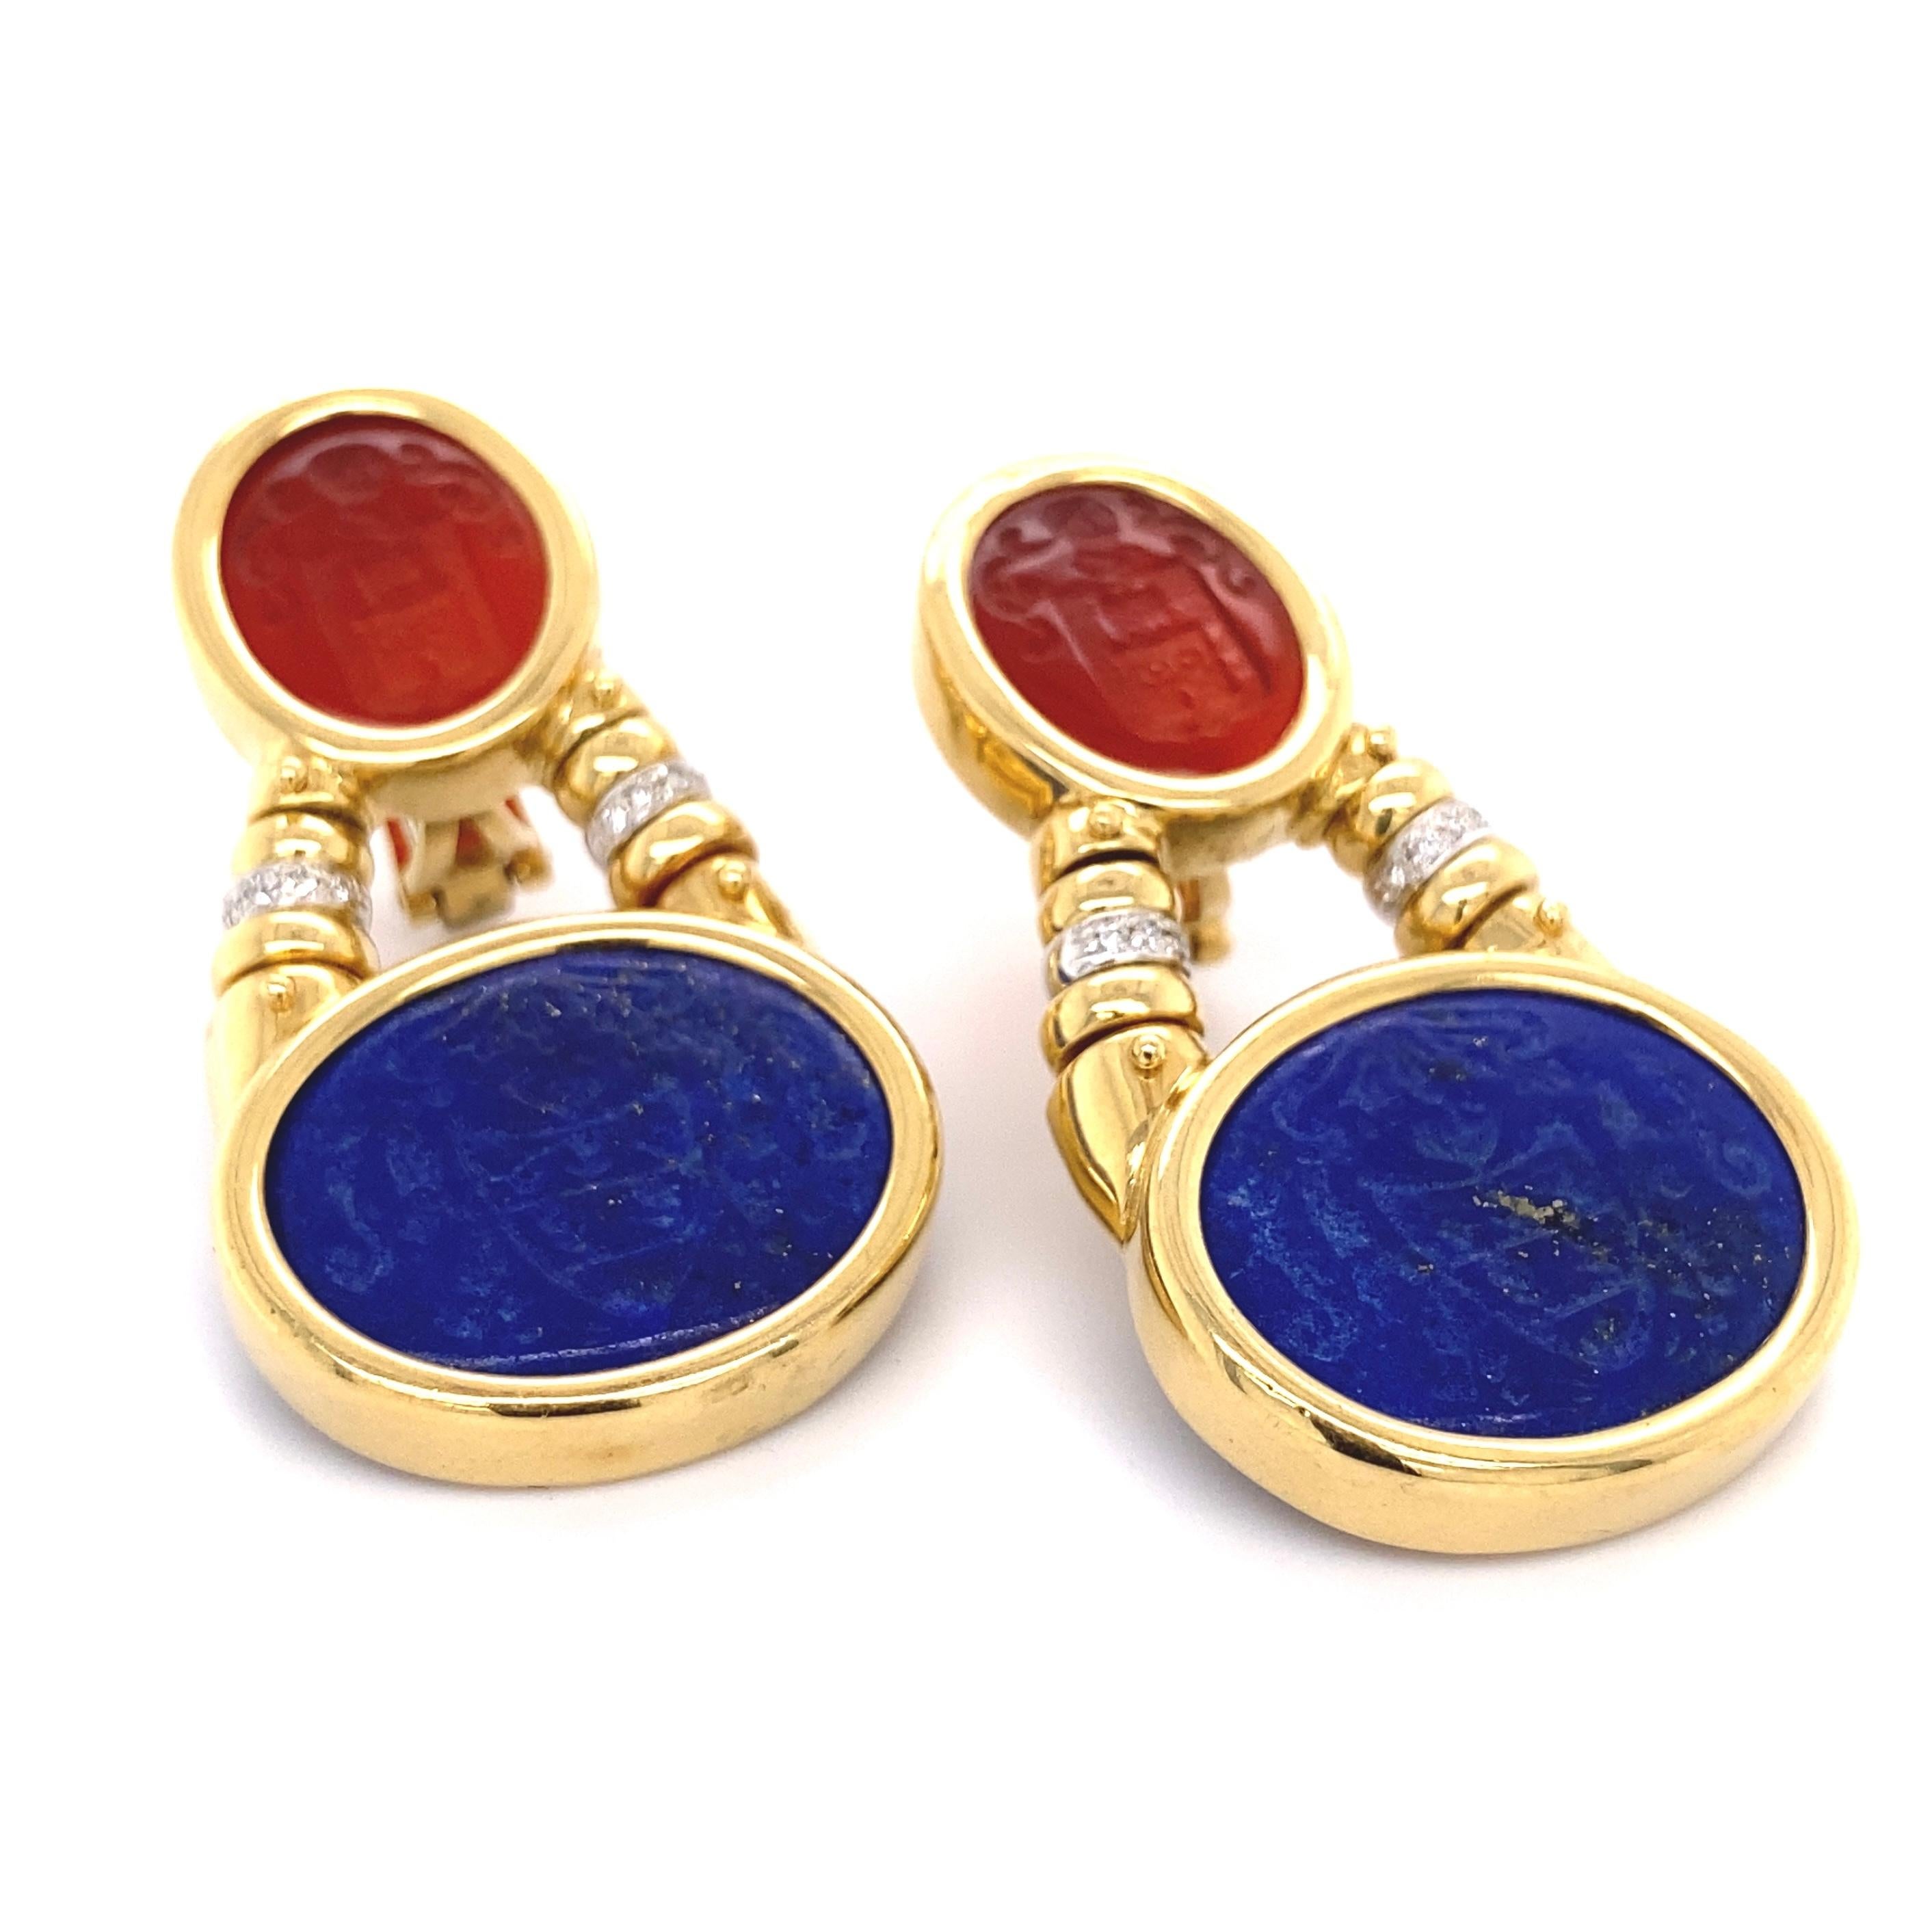 Simply Beautiful! Finely detailed Dangle Earrings. Carved Carnelian on top, carved Lapis Lazuli at bottom, enhanced with Diamond rondelles in between the Gemstones, weighing approx. 0.15tcw. Hand crafted in 18K yellow Gold mounting. Marked: Italy,